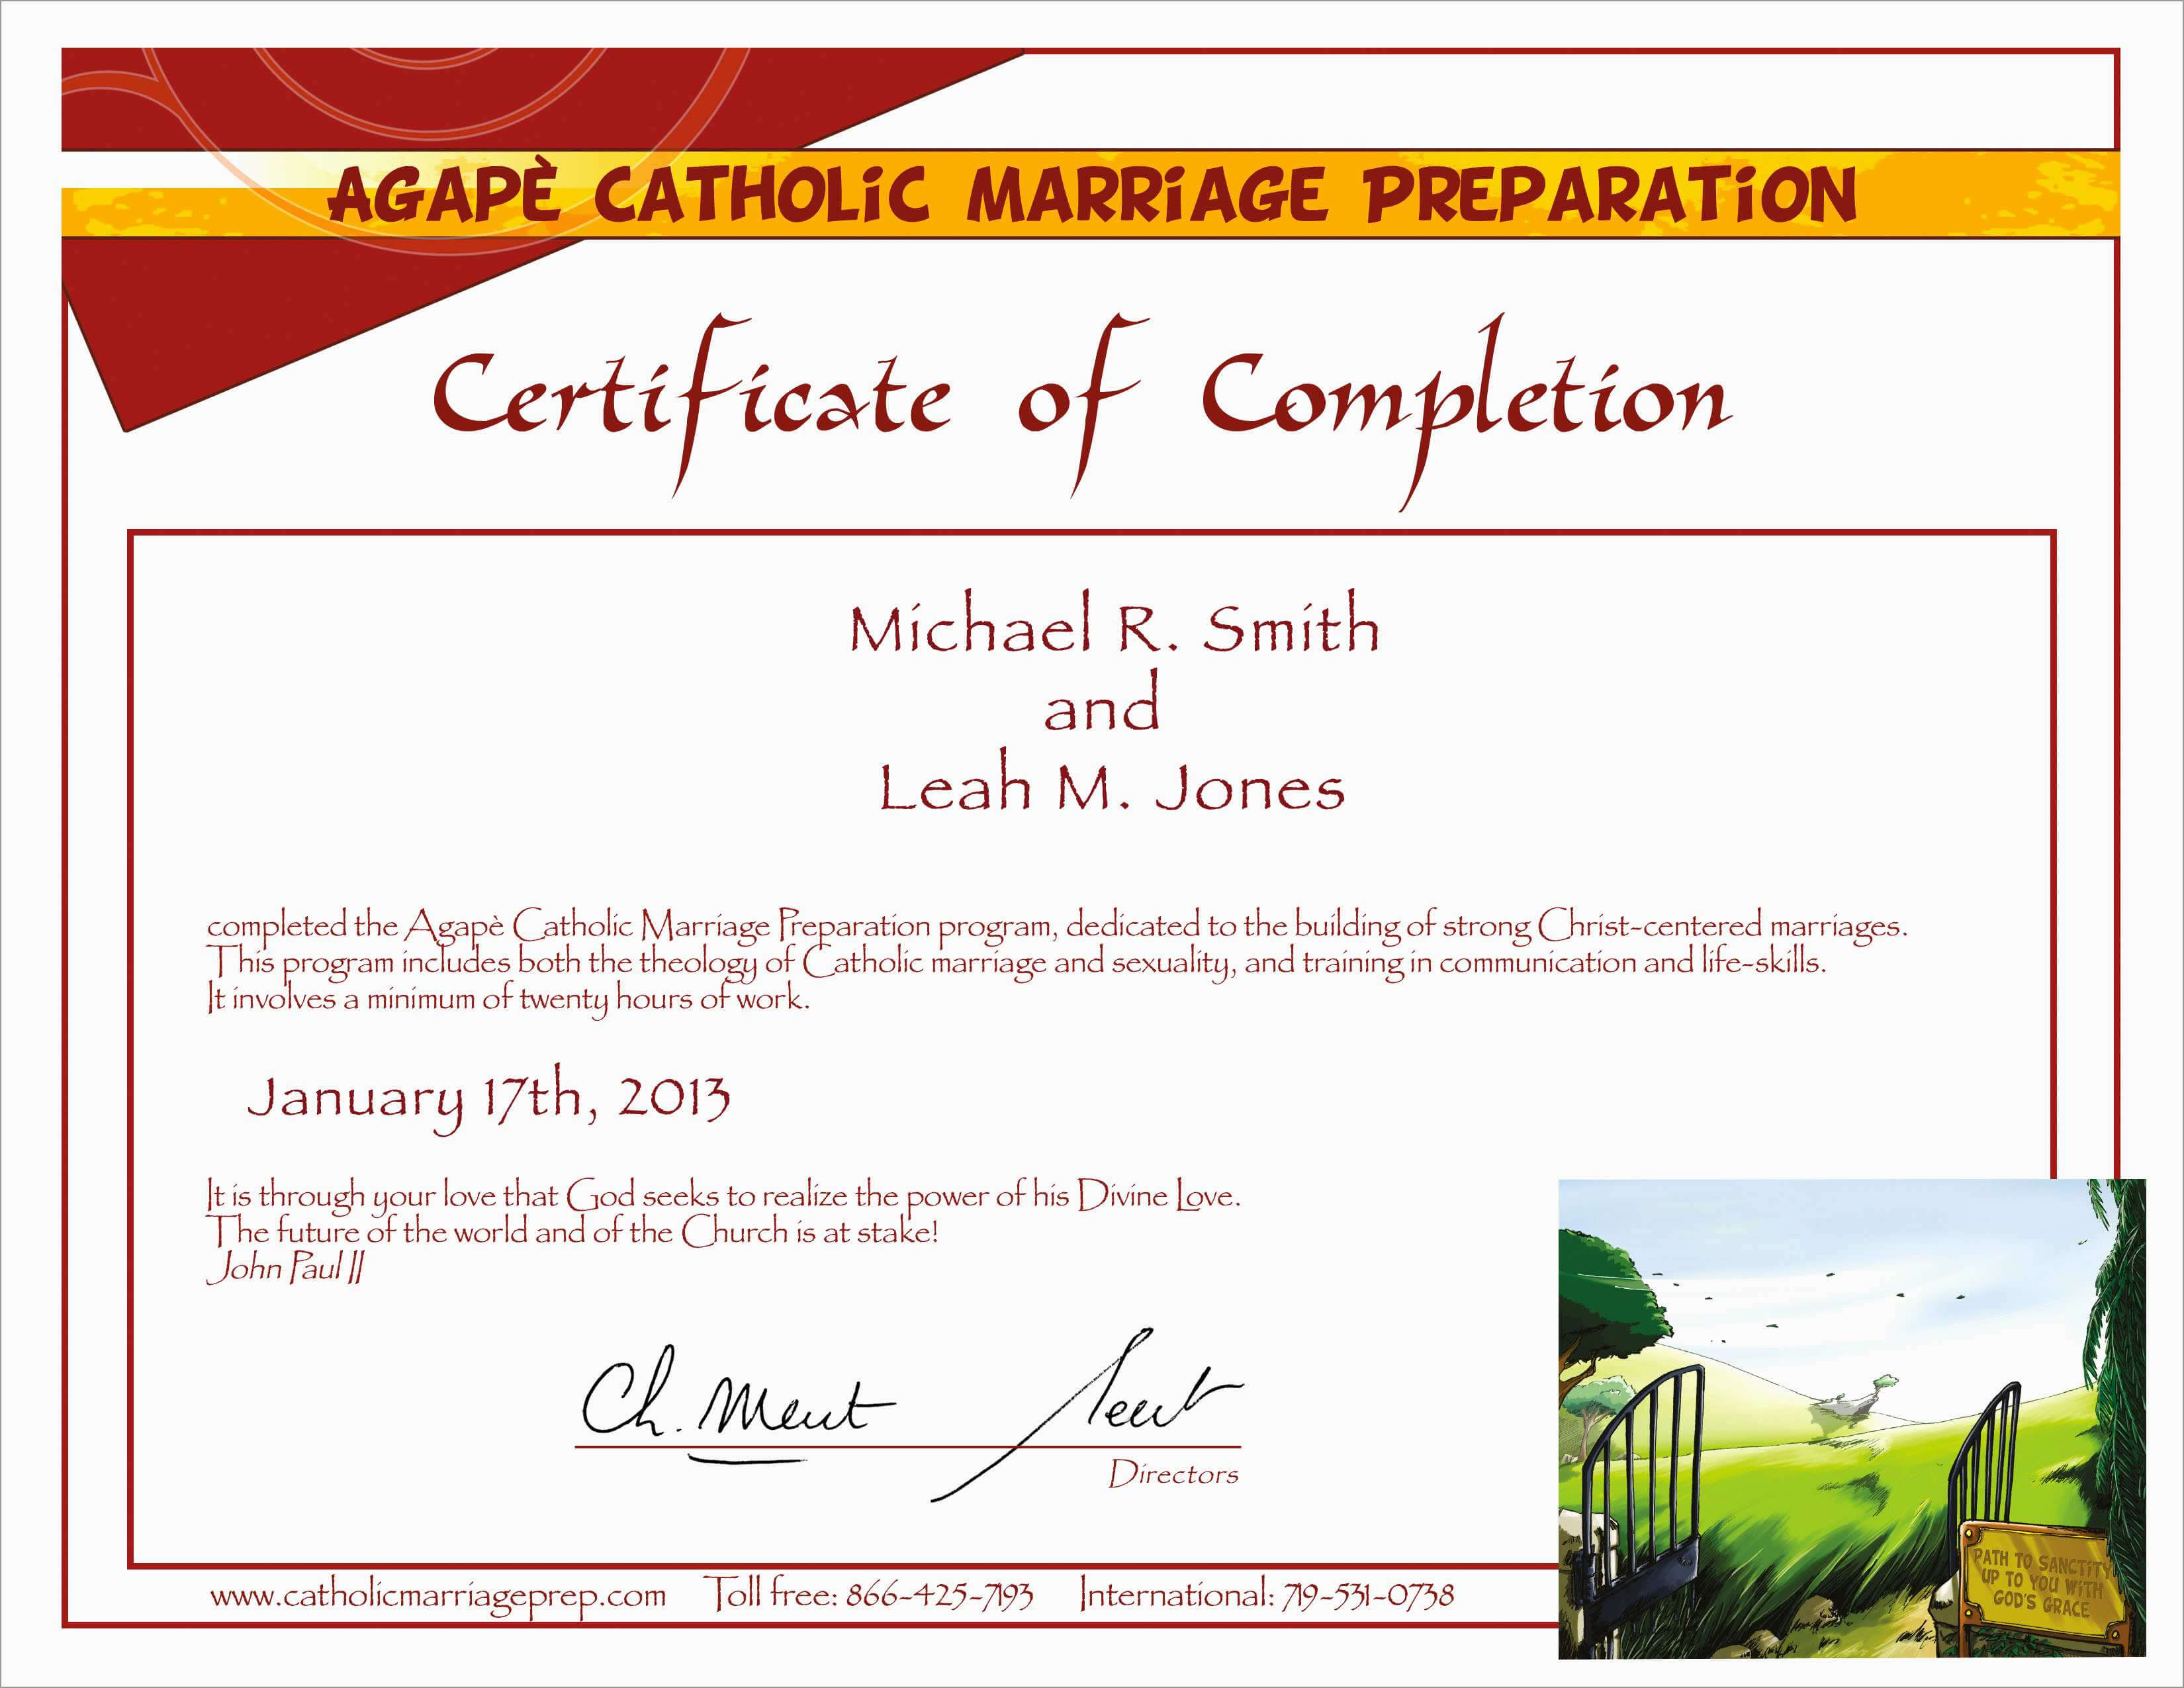 Free Premarital Counseling Certificate Of Completion Throughout Premarital Counseling Certificate Of Completion Template